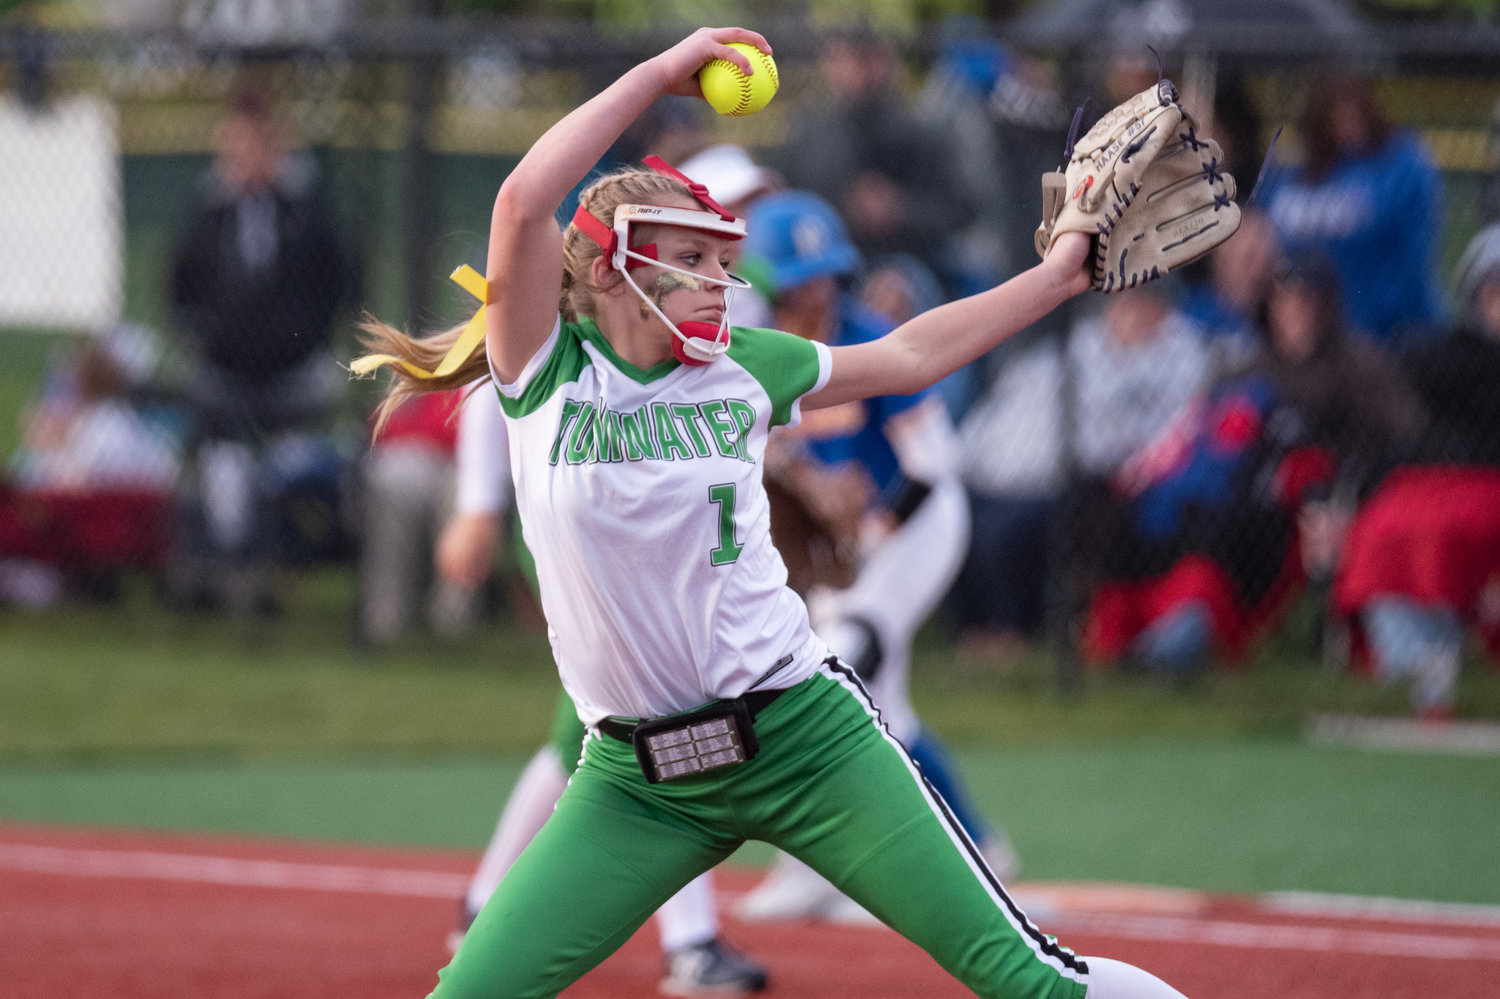 Tumwater pitcher Ella Ferguson winds up to deliver a strike against Rochester in the 2A District 4 tournament at Recreation Park May 19.